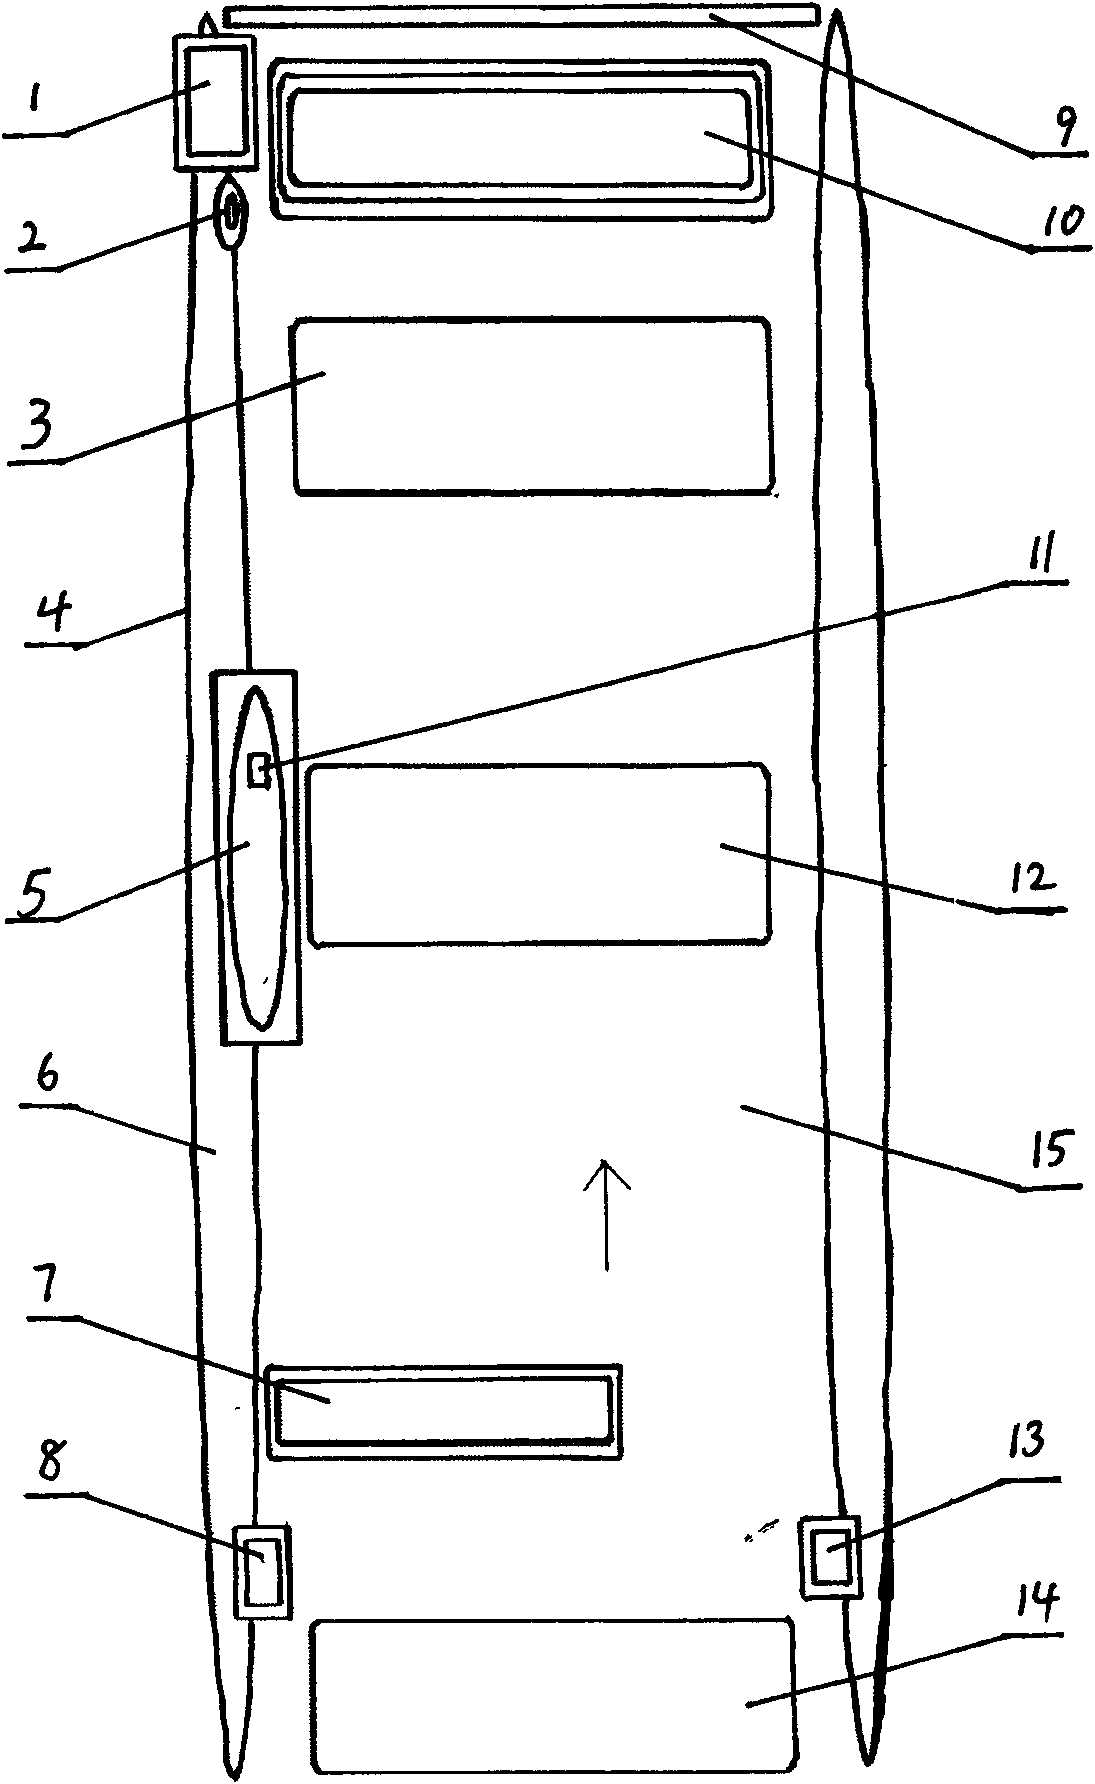 Highway toll station dynamic weighting apparatus controlling and managing system